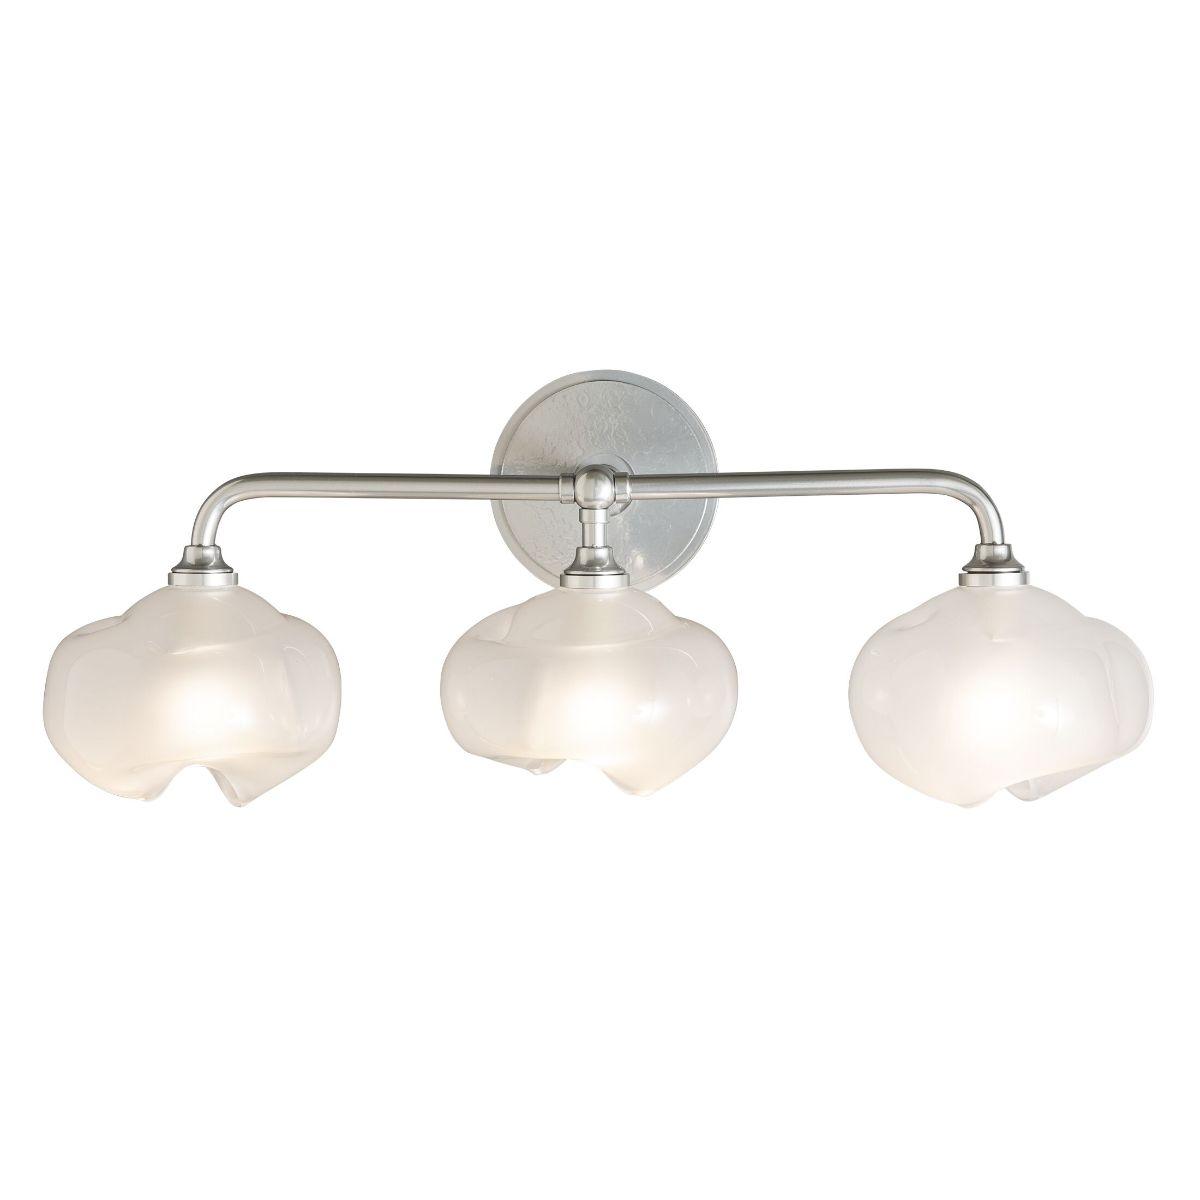 Ume 22 in. 3 Lights Vanity Light Clear Glass